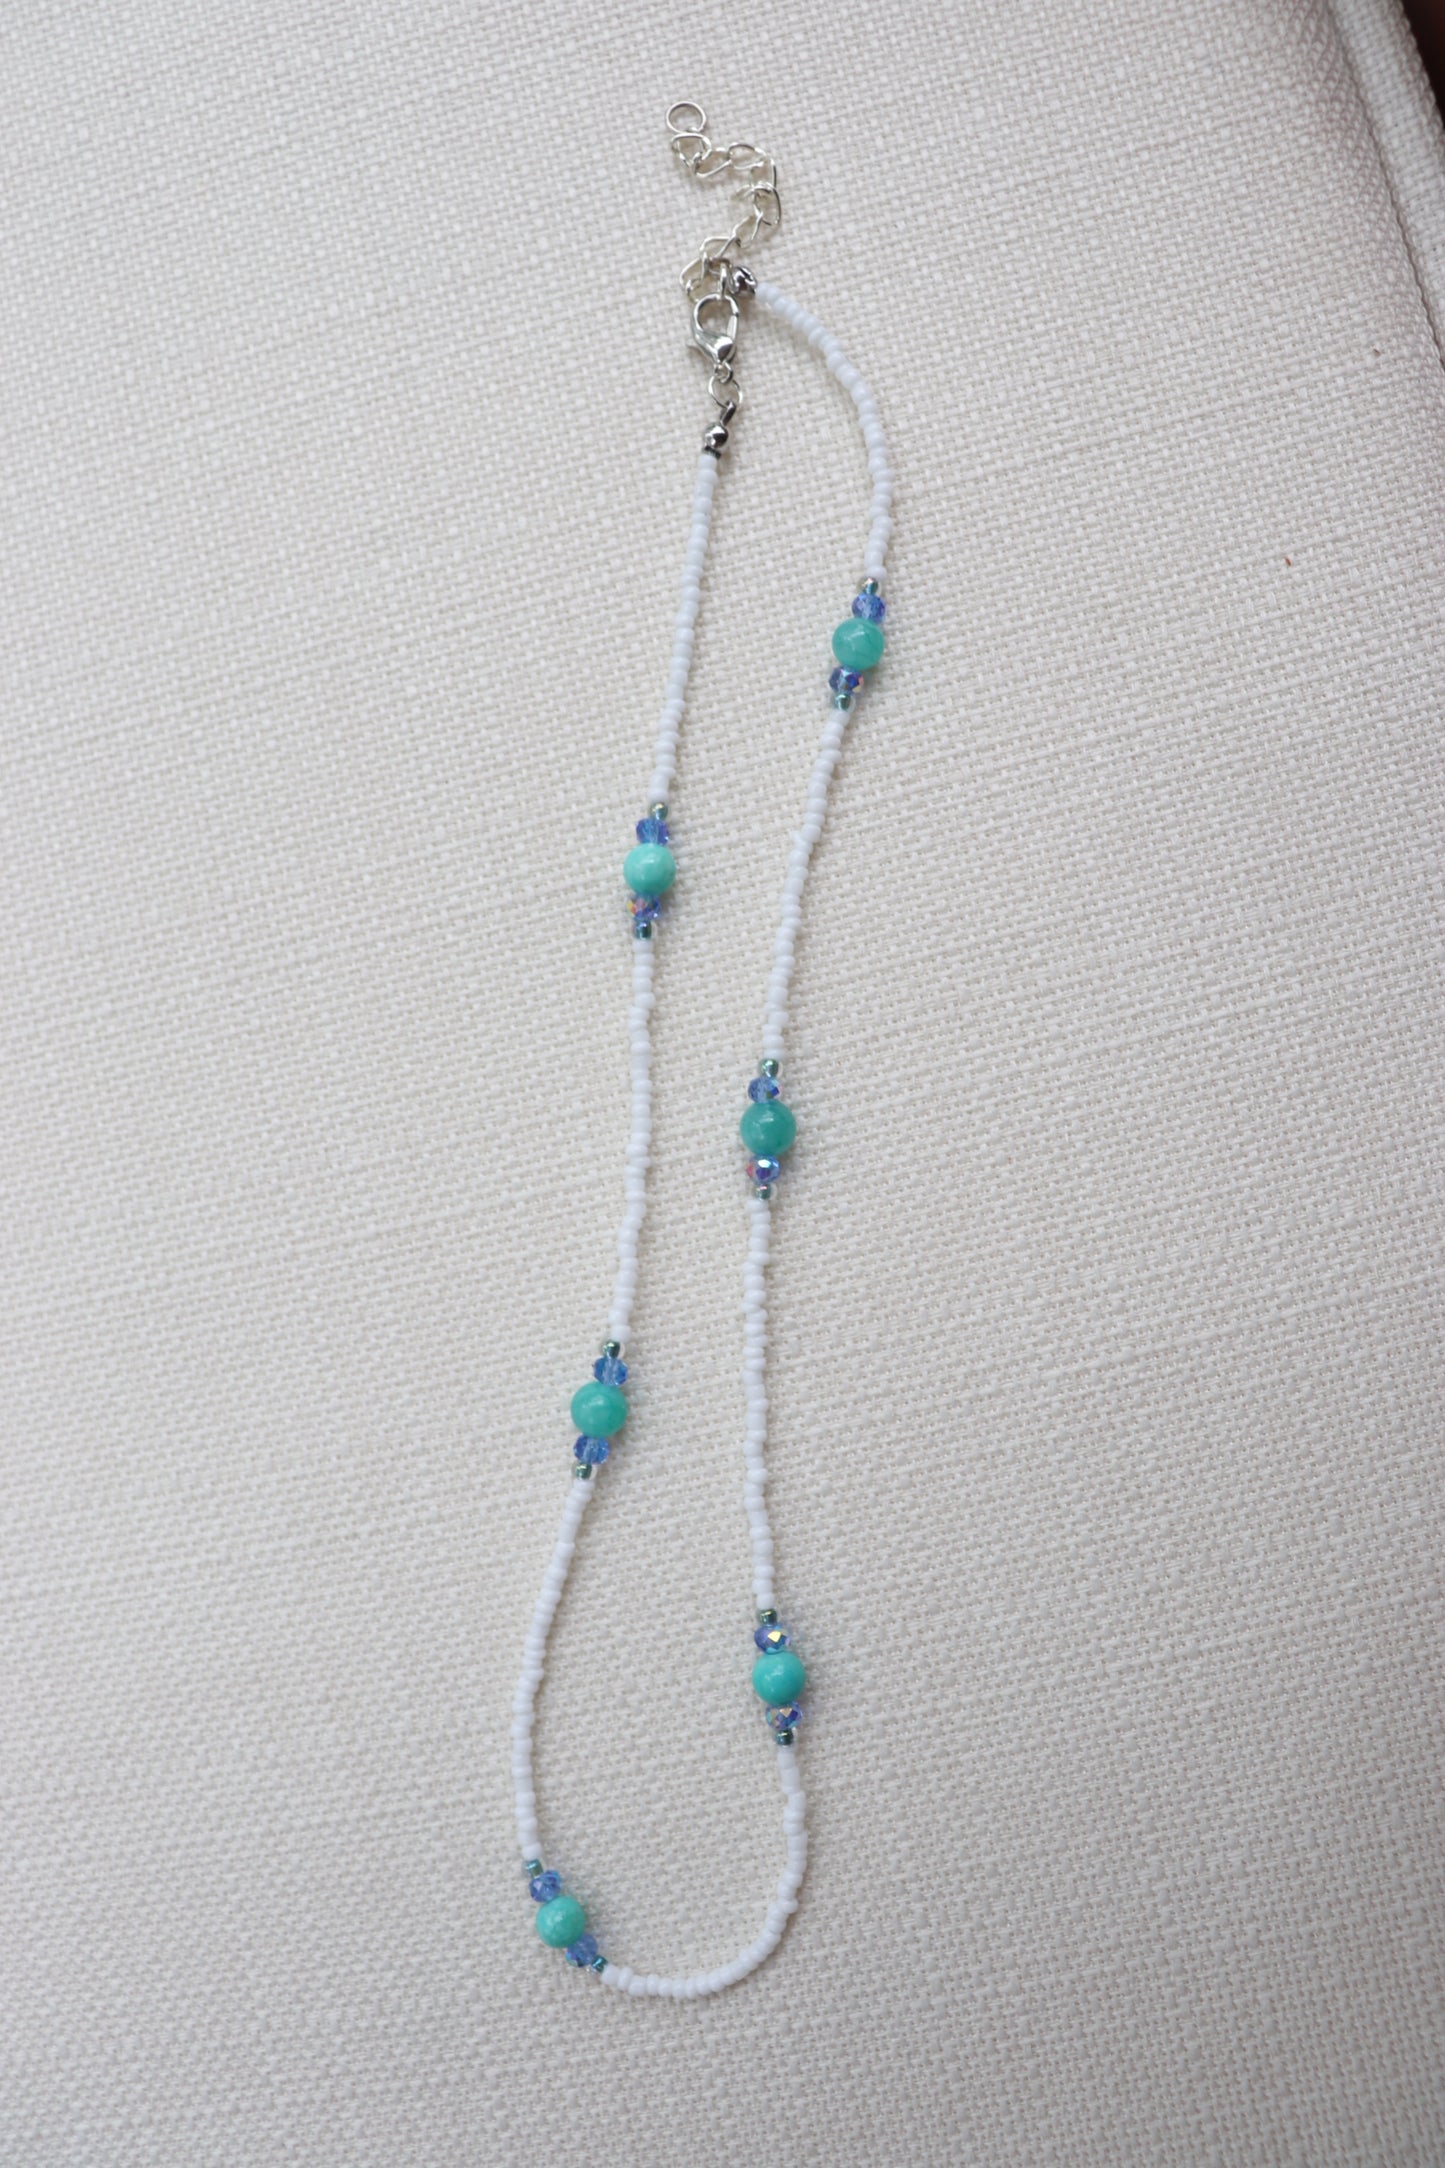 White and teal stones